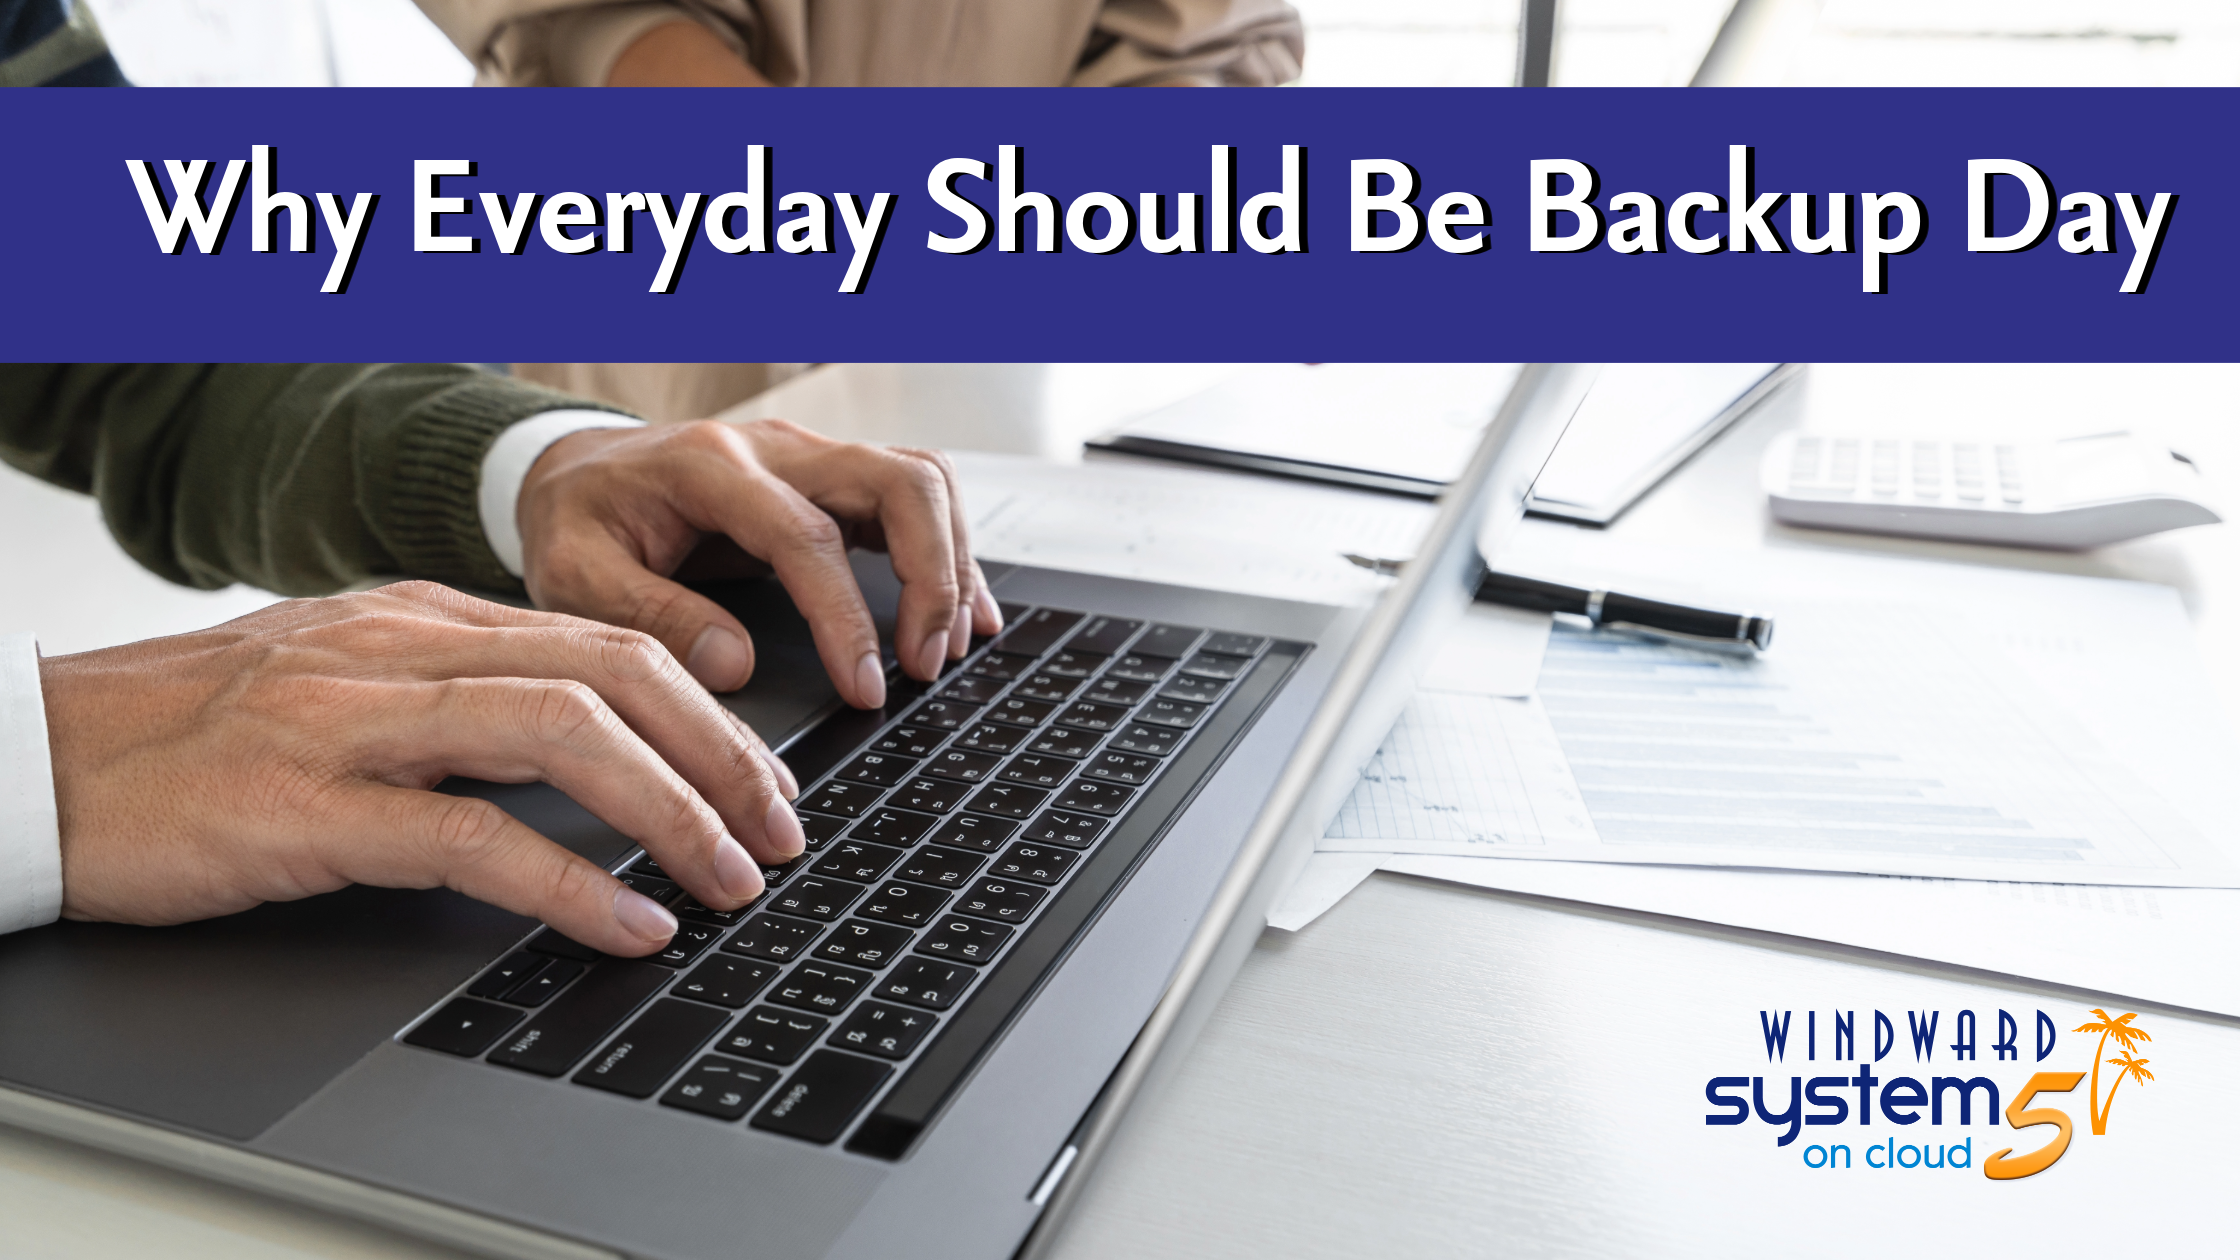 The Day After World Backup Day: Why Everyday Should Be Backup Day